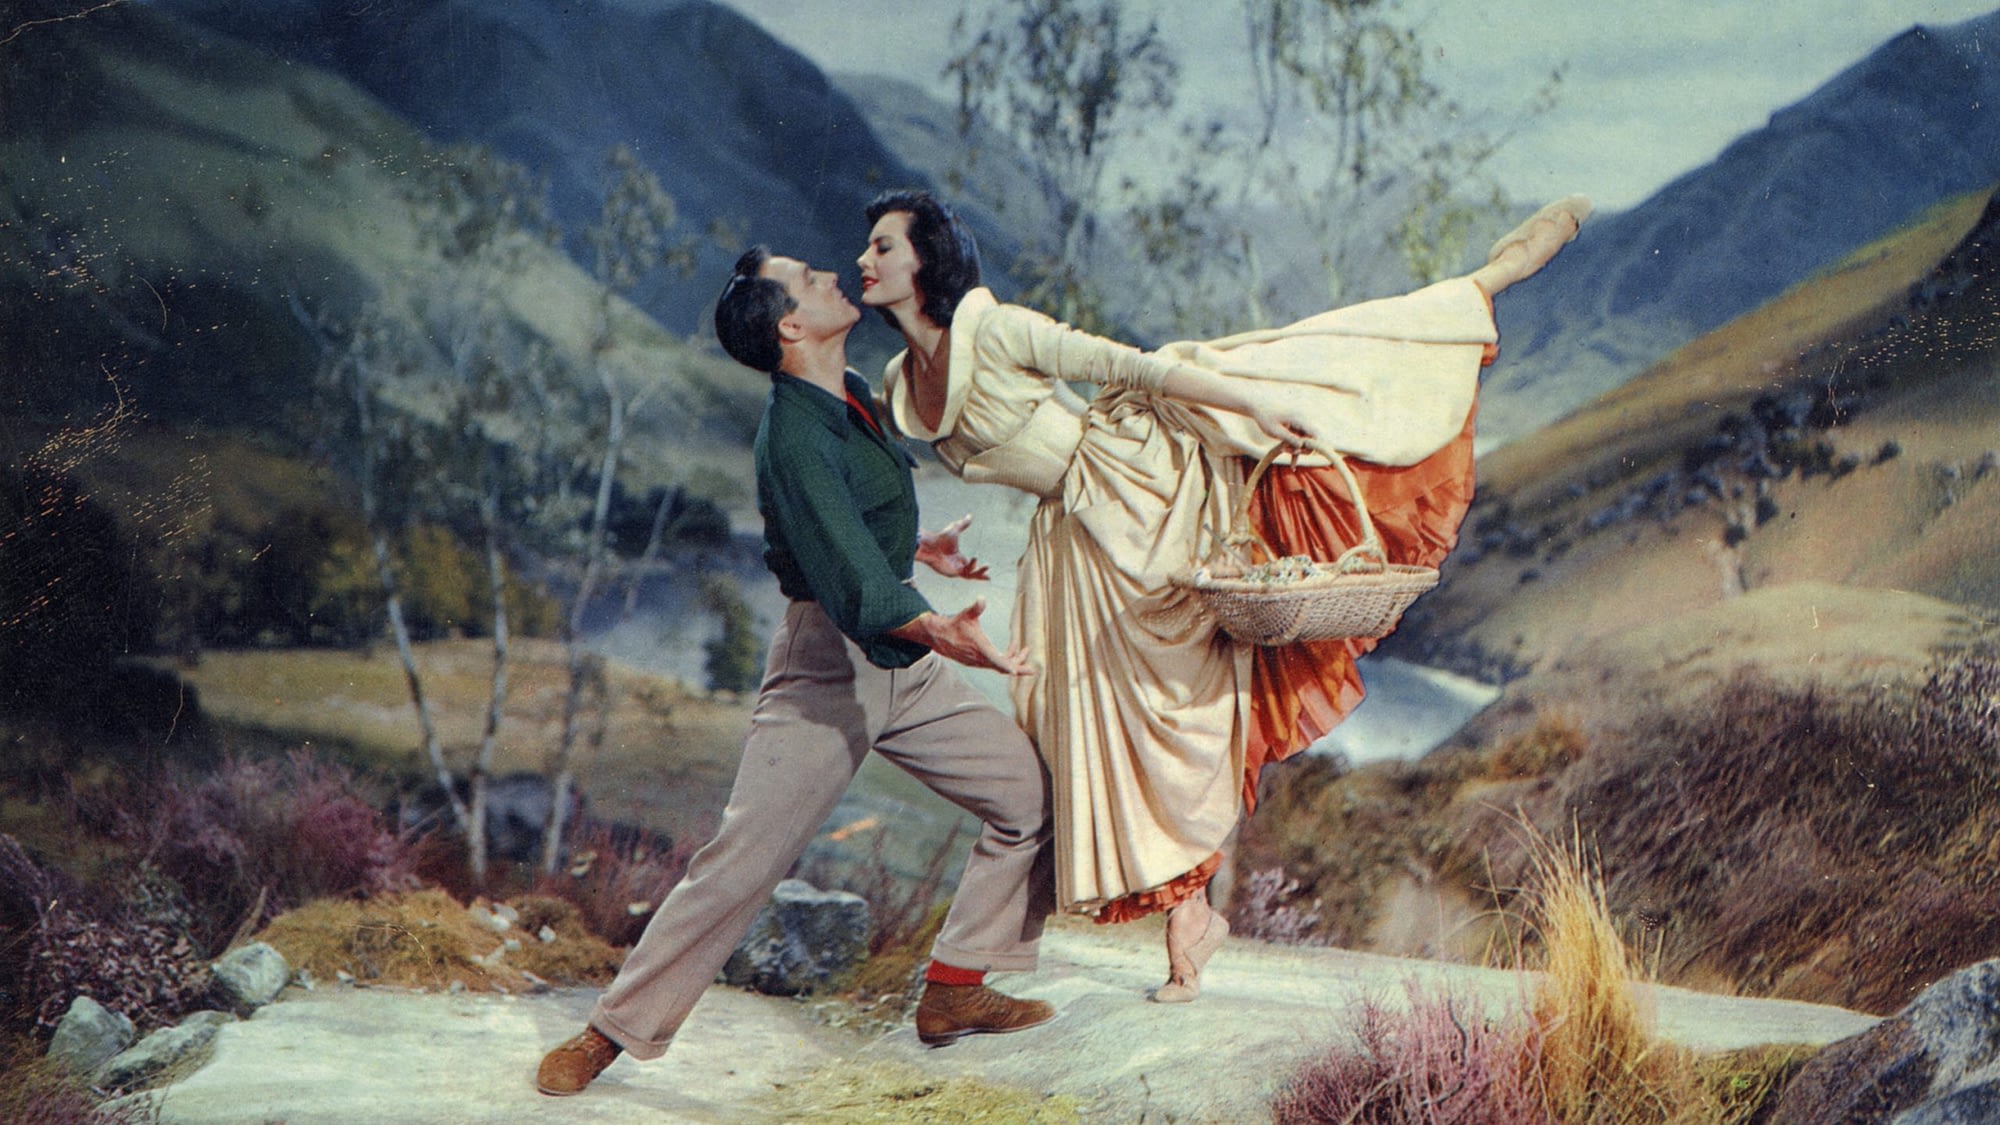 Image: Gene Kelly and Cyd Charisse dancing together in the film Brigadoon